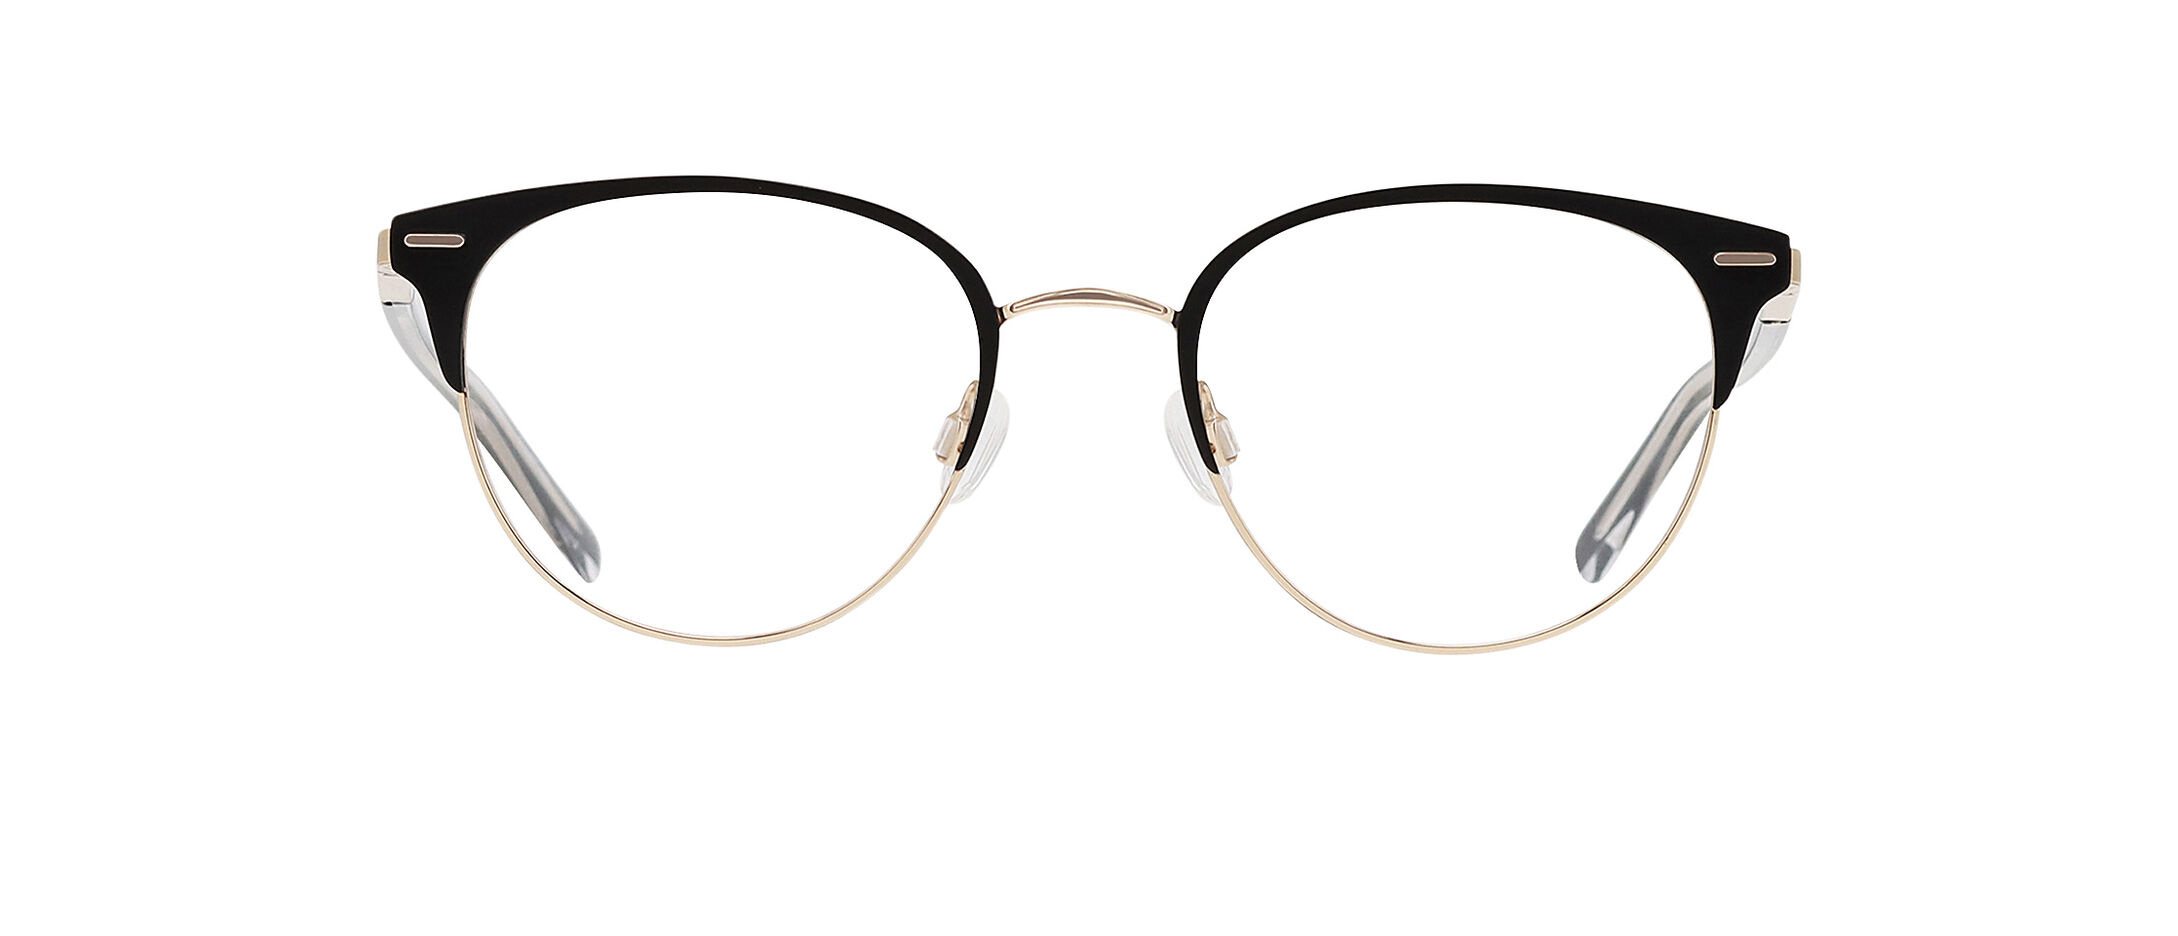 Calvin Klein CK21303 Glasses | Free Shipping and Returns | Eyeconic